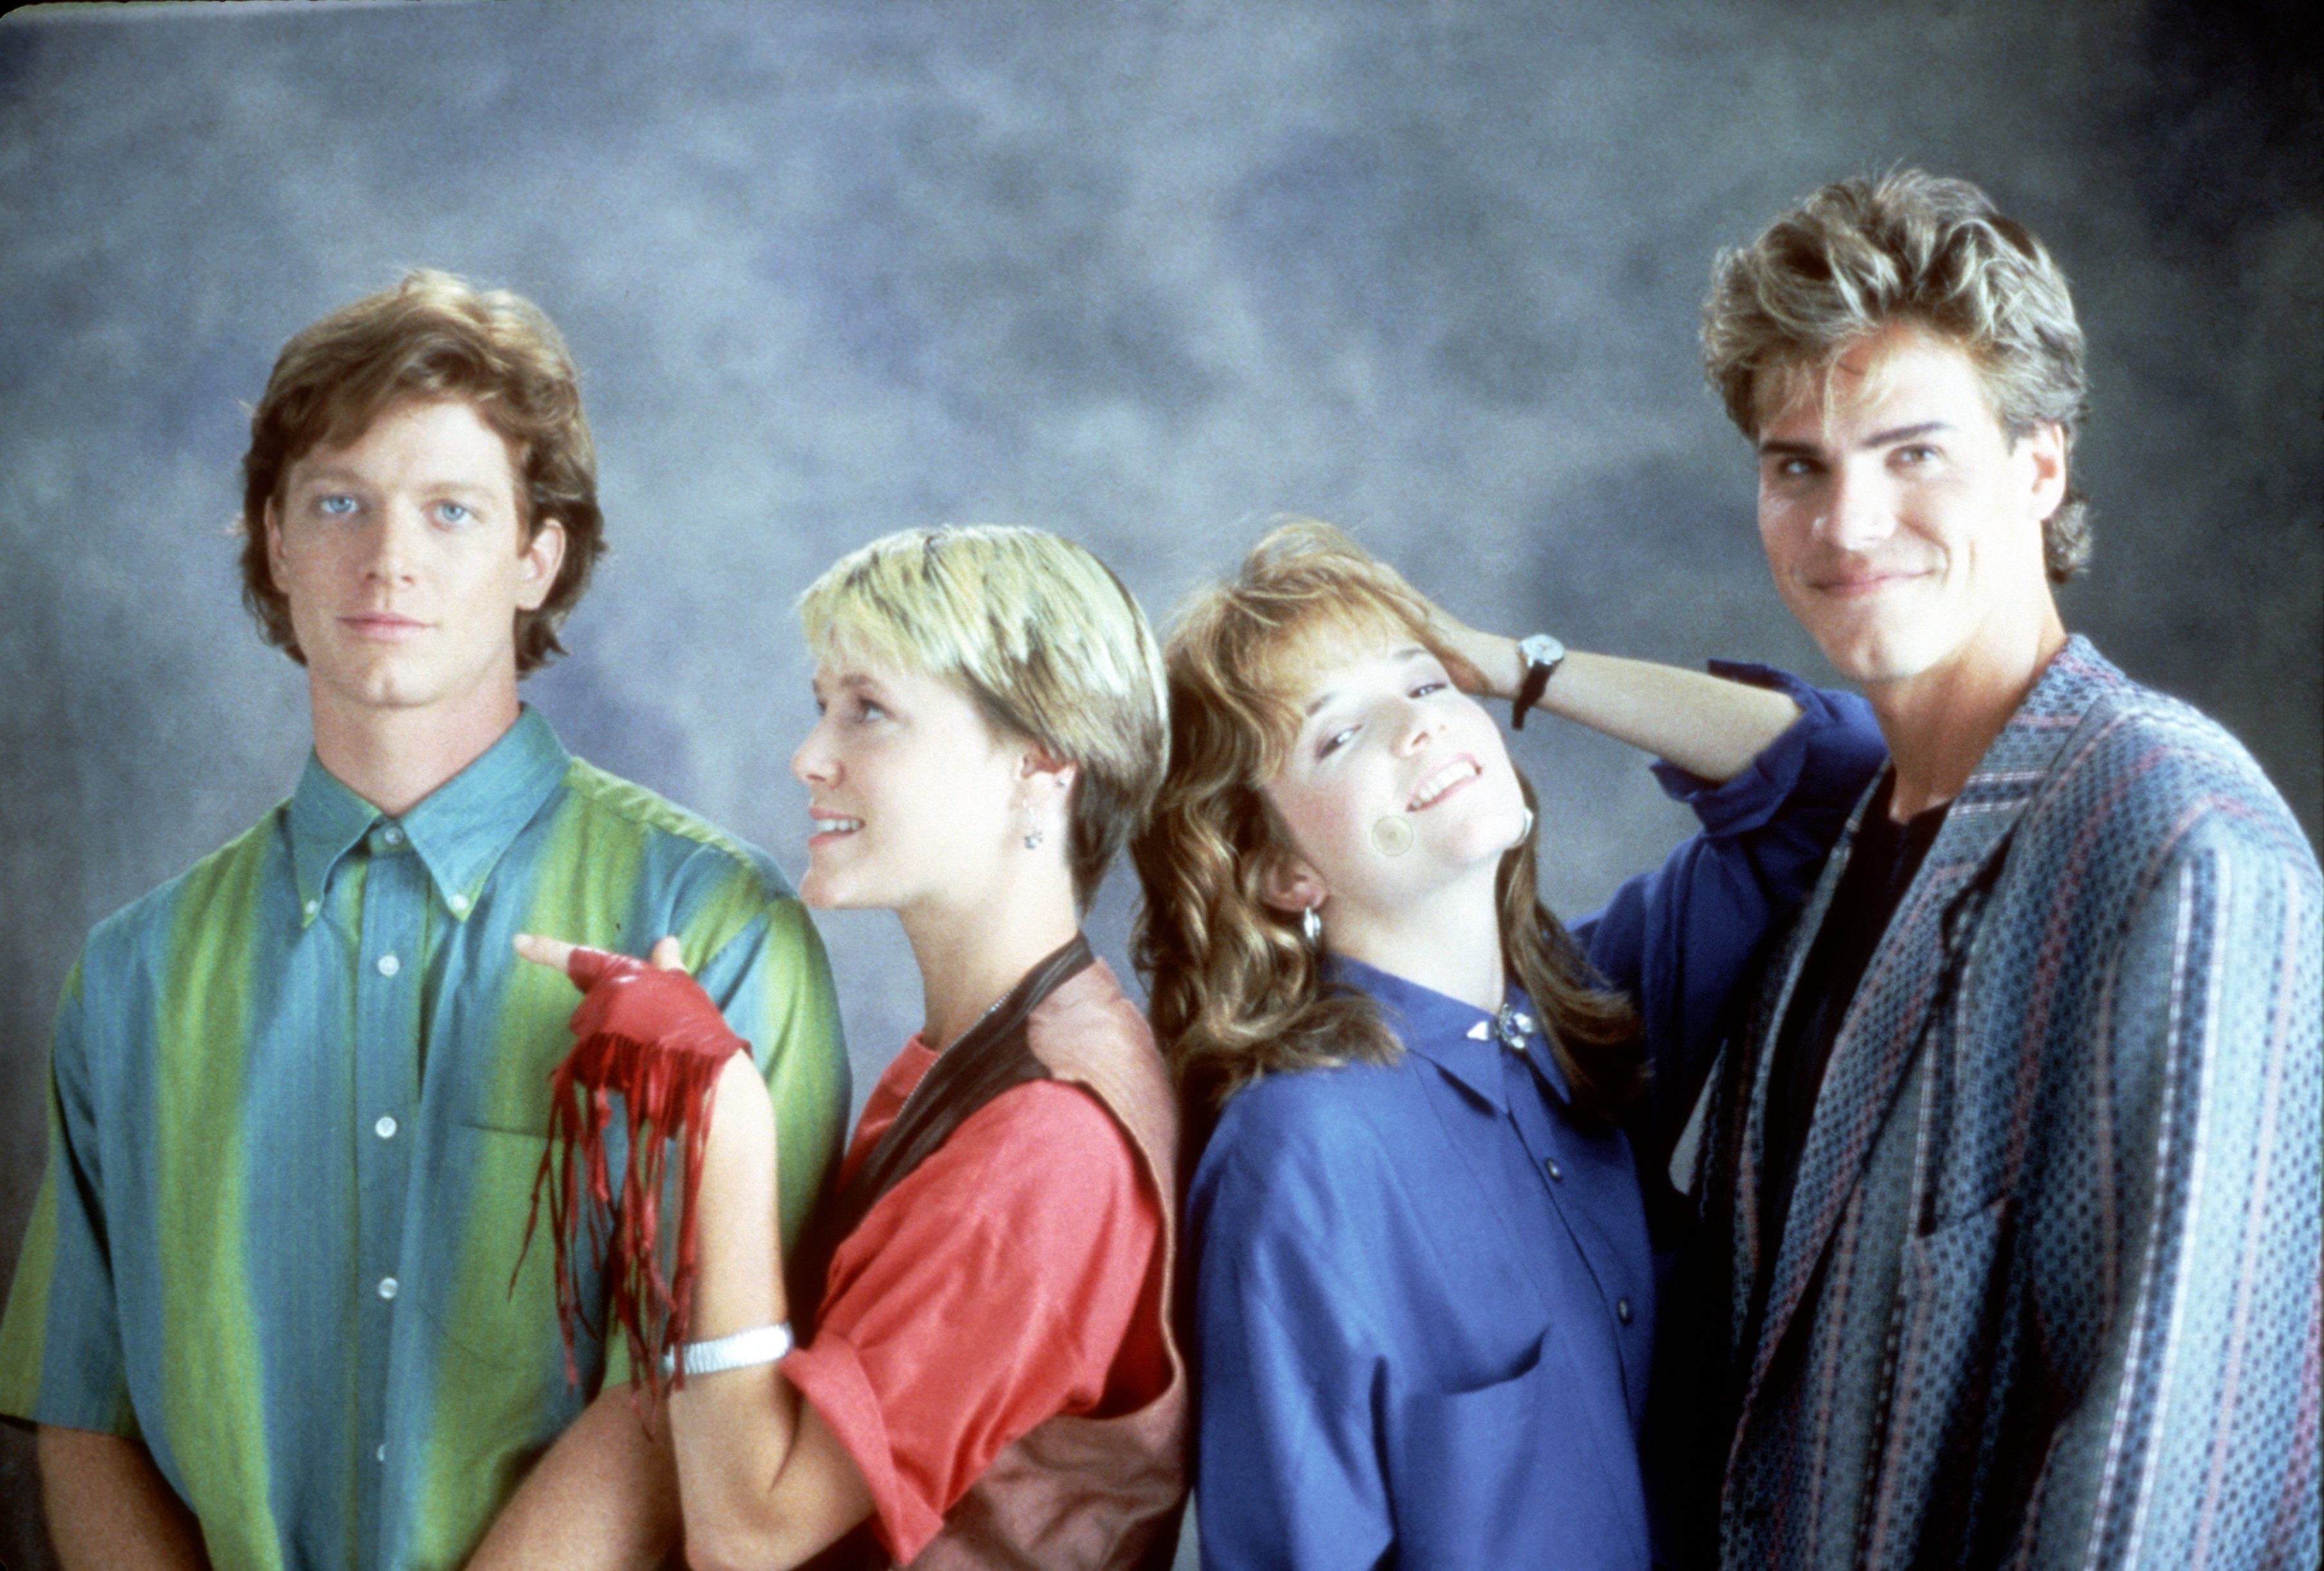 From left to right, actors Eric Stoltz, Mary Stuart Masterson, Lea Thompson and Craig Sheffer, the stars of the film 'Some Kind of Wonderful.' | Source: Getty Images